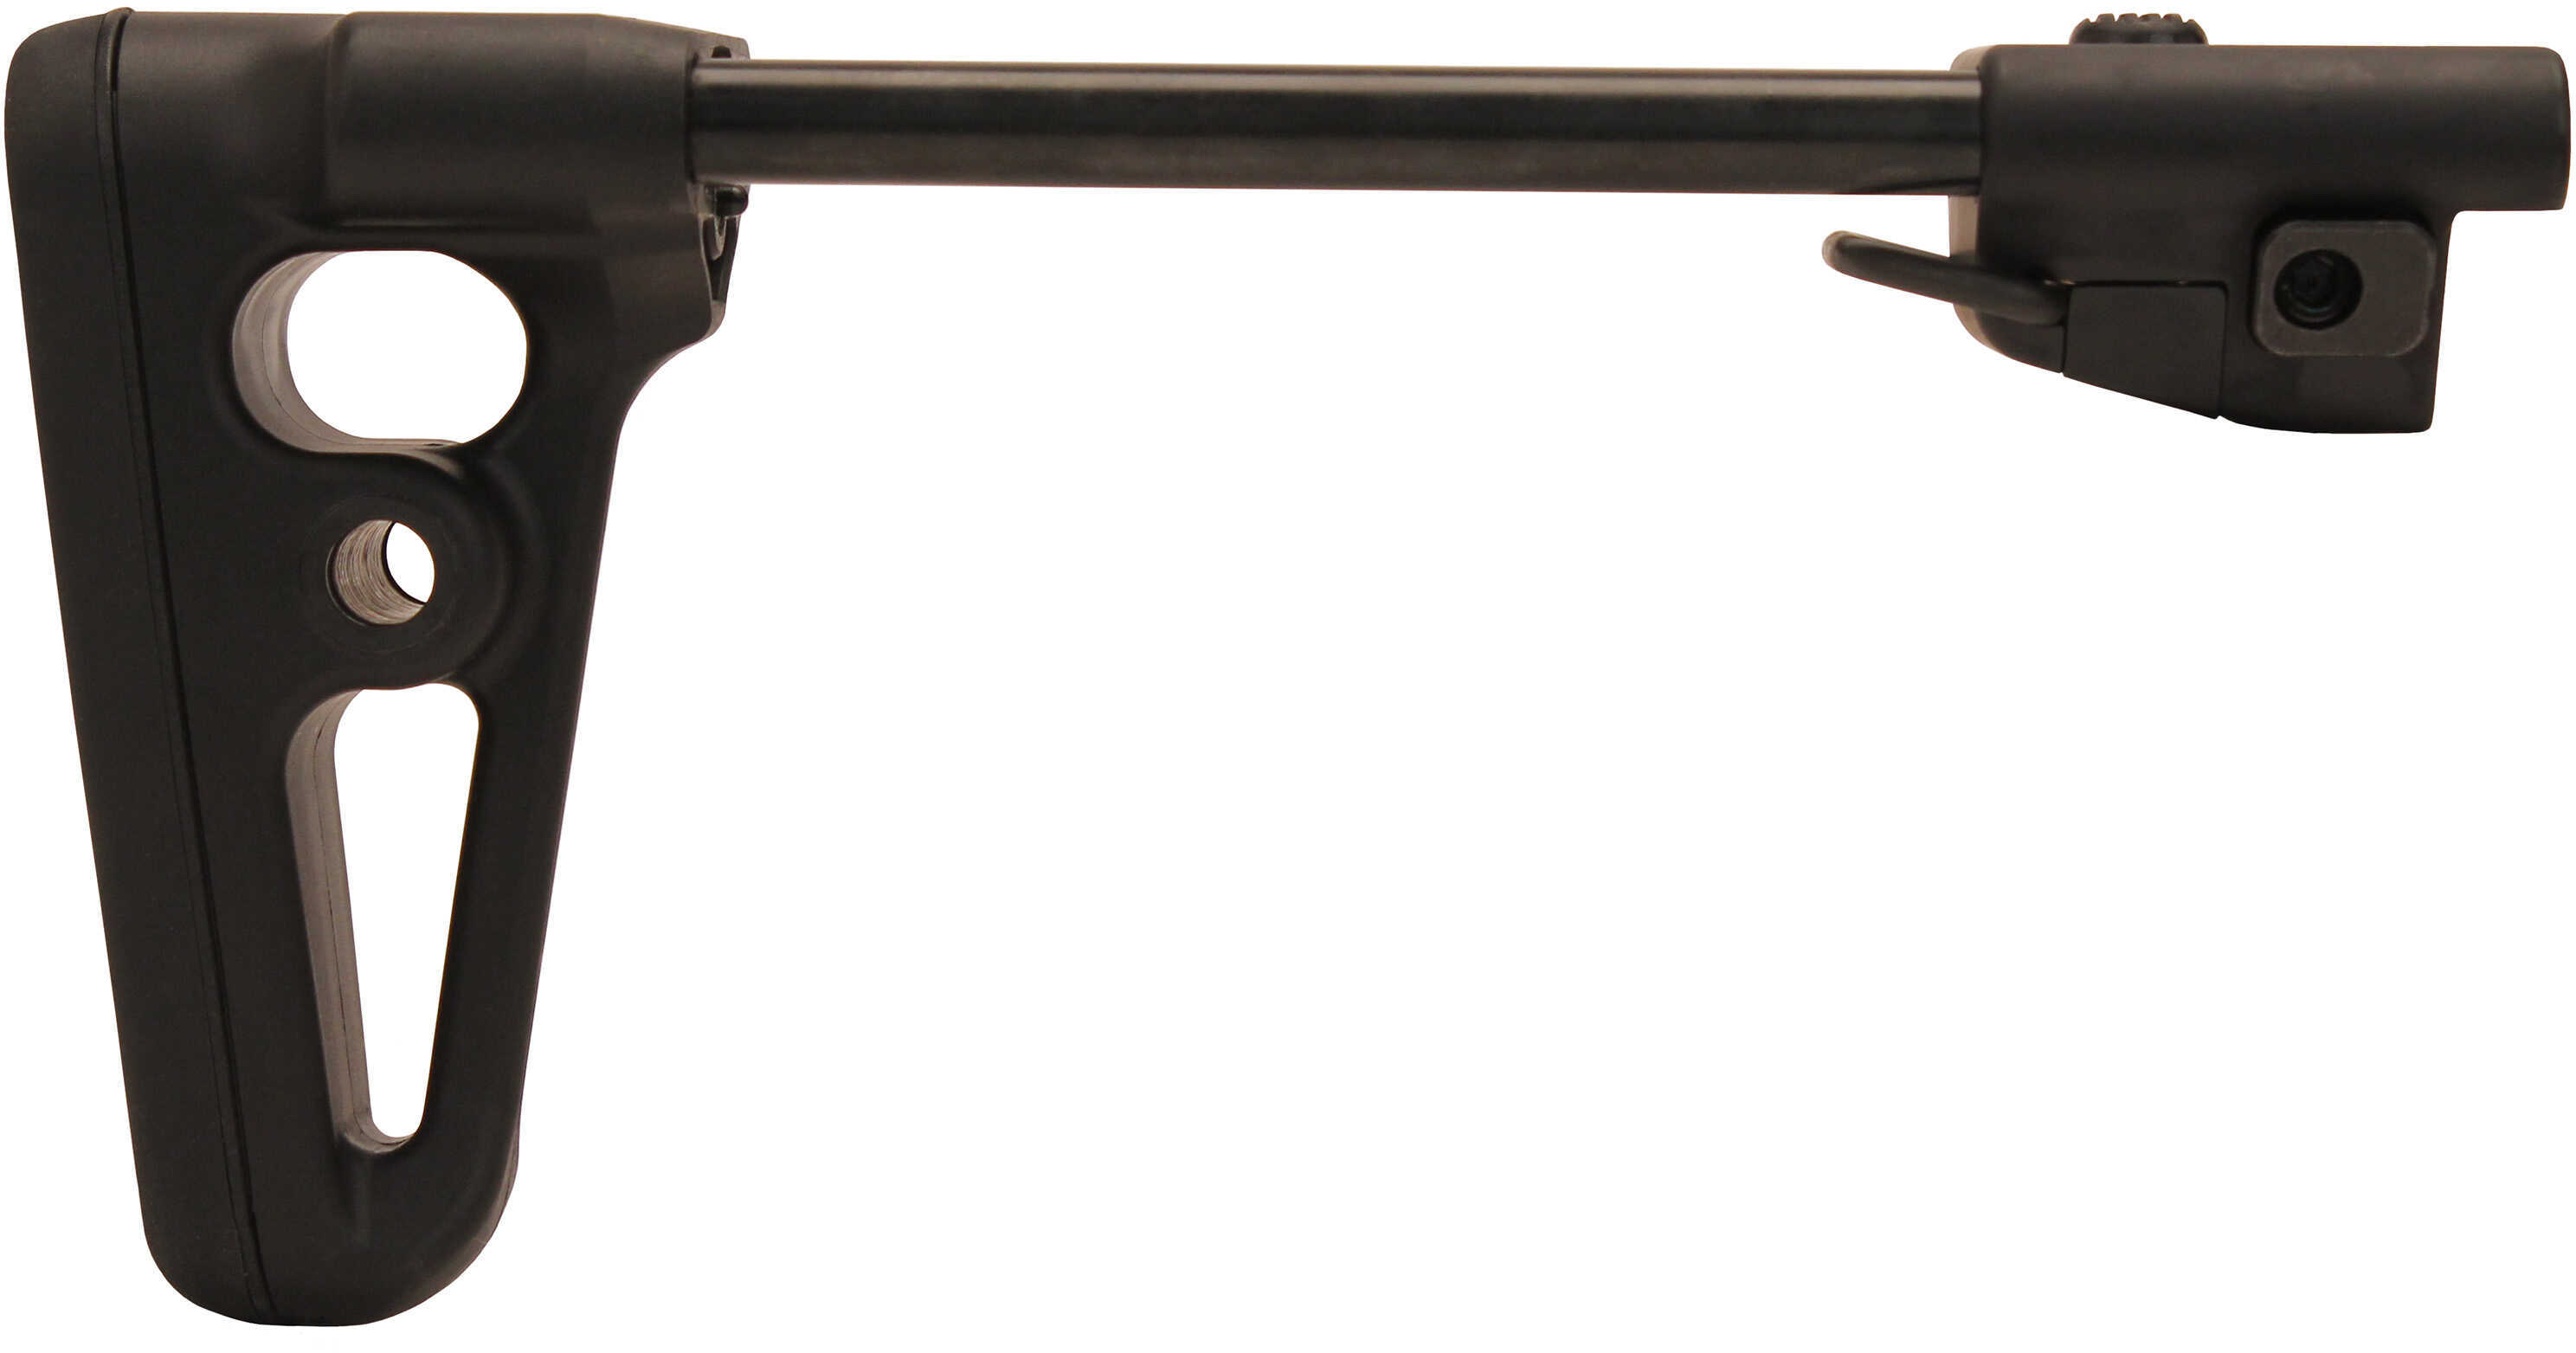 SigTac MCX/MPX Collapsible Stock, Aluminum Black Md: STOCK-X-COLLAPSIBLE-BLK